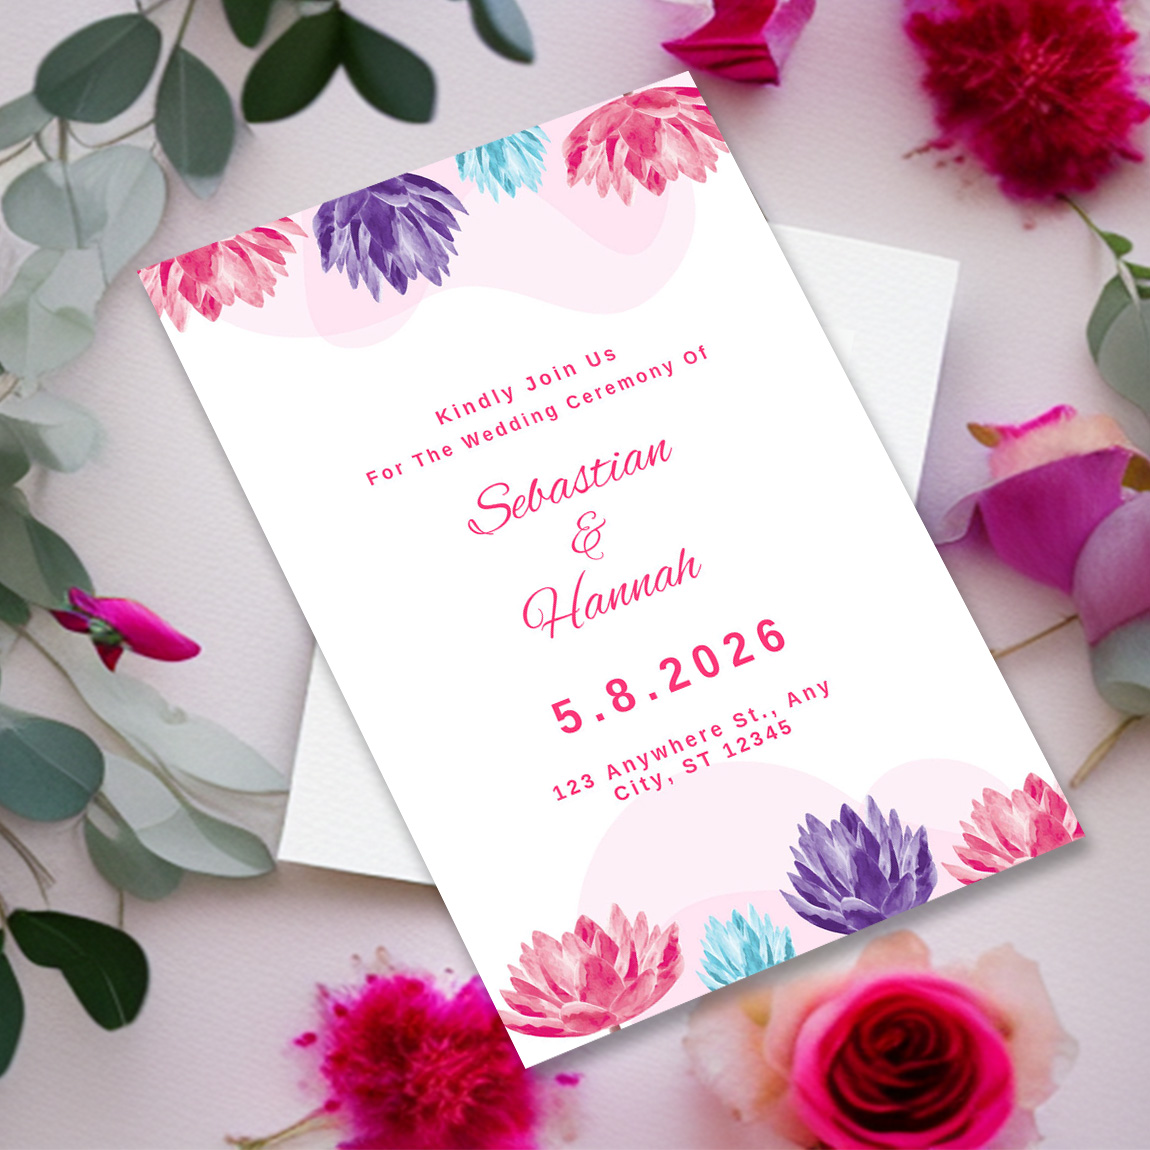 Wedding Invitation Card Watercolour Floral Background cover image.